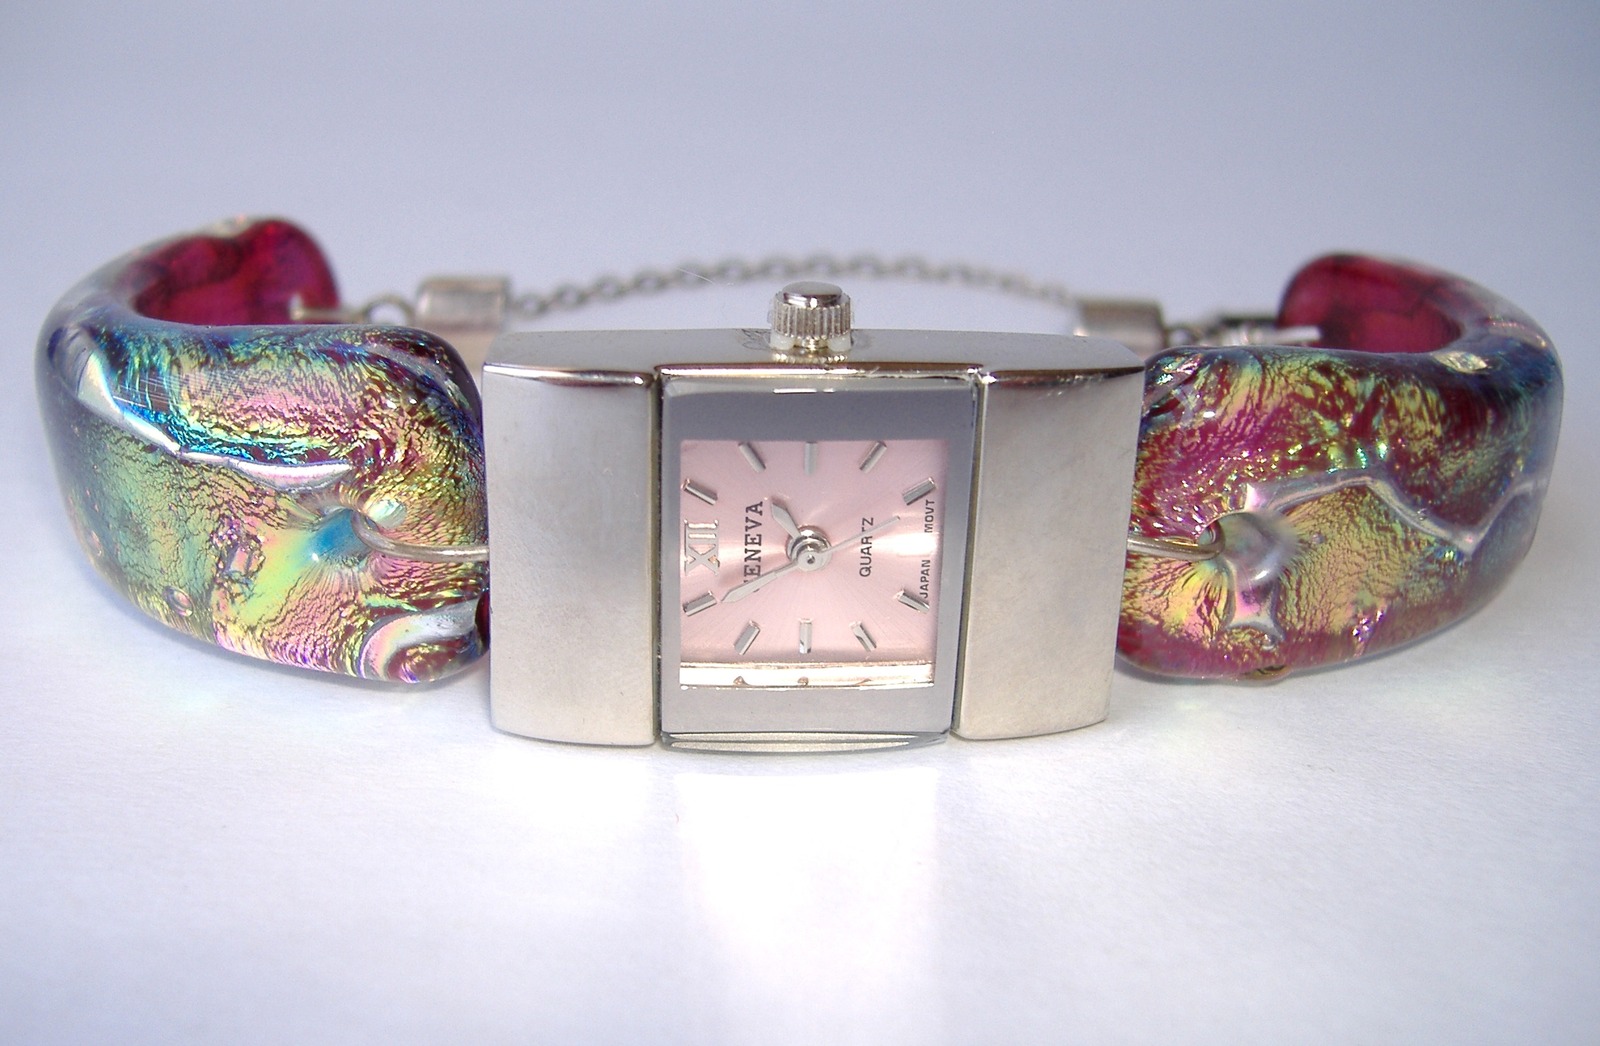 Primary image for Pink Breast Cancer Awareness Watch Fused Dichroic Glass Band Bracelet Wristwatch